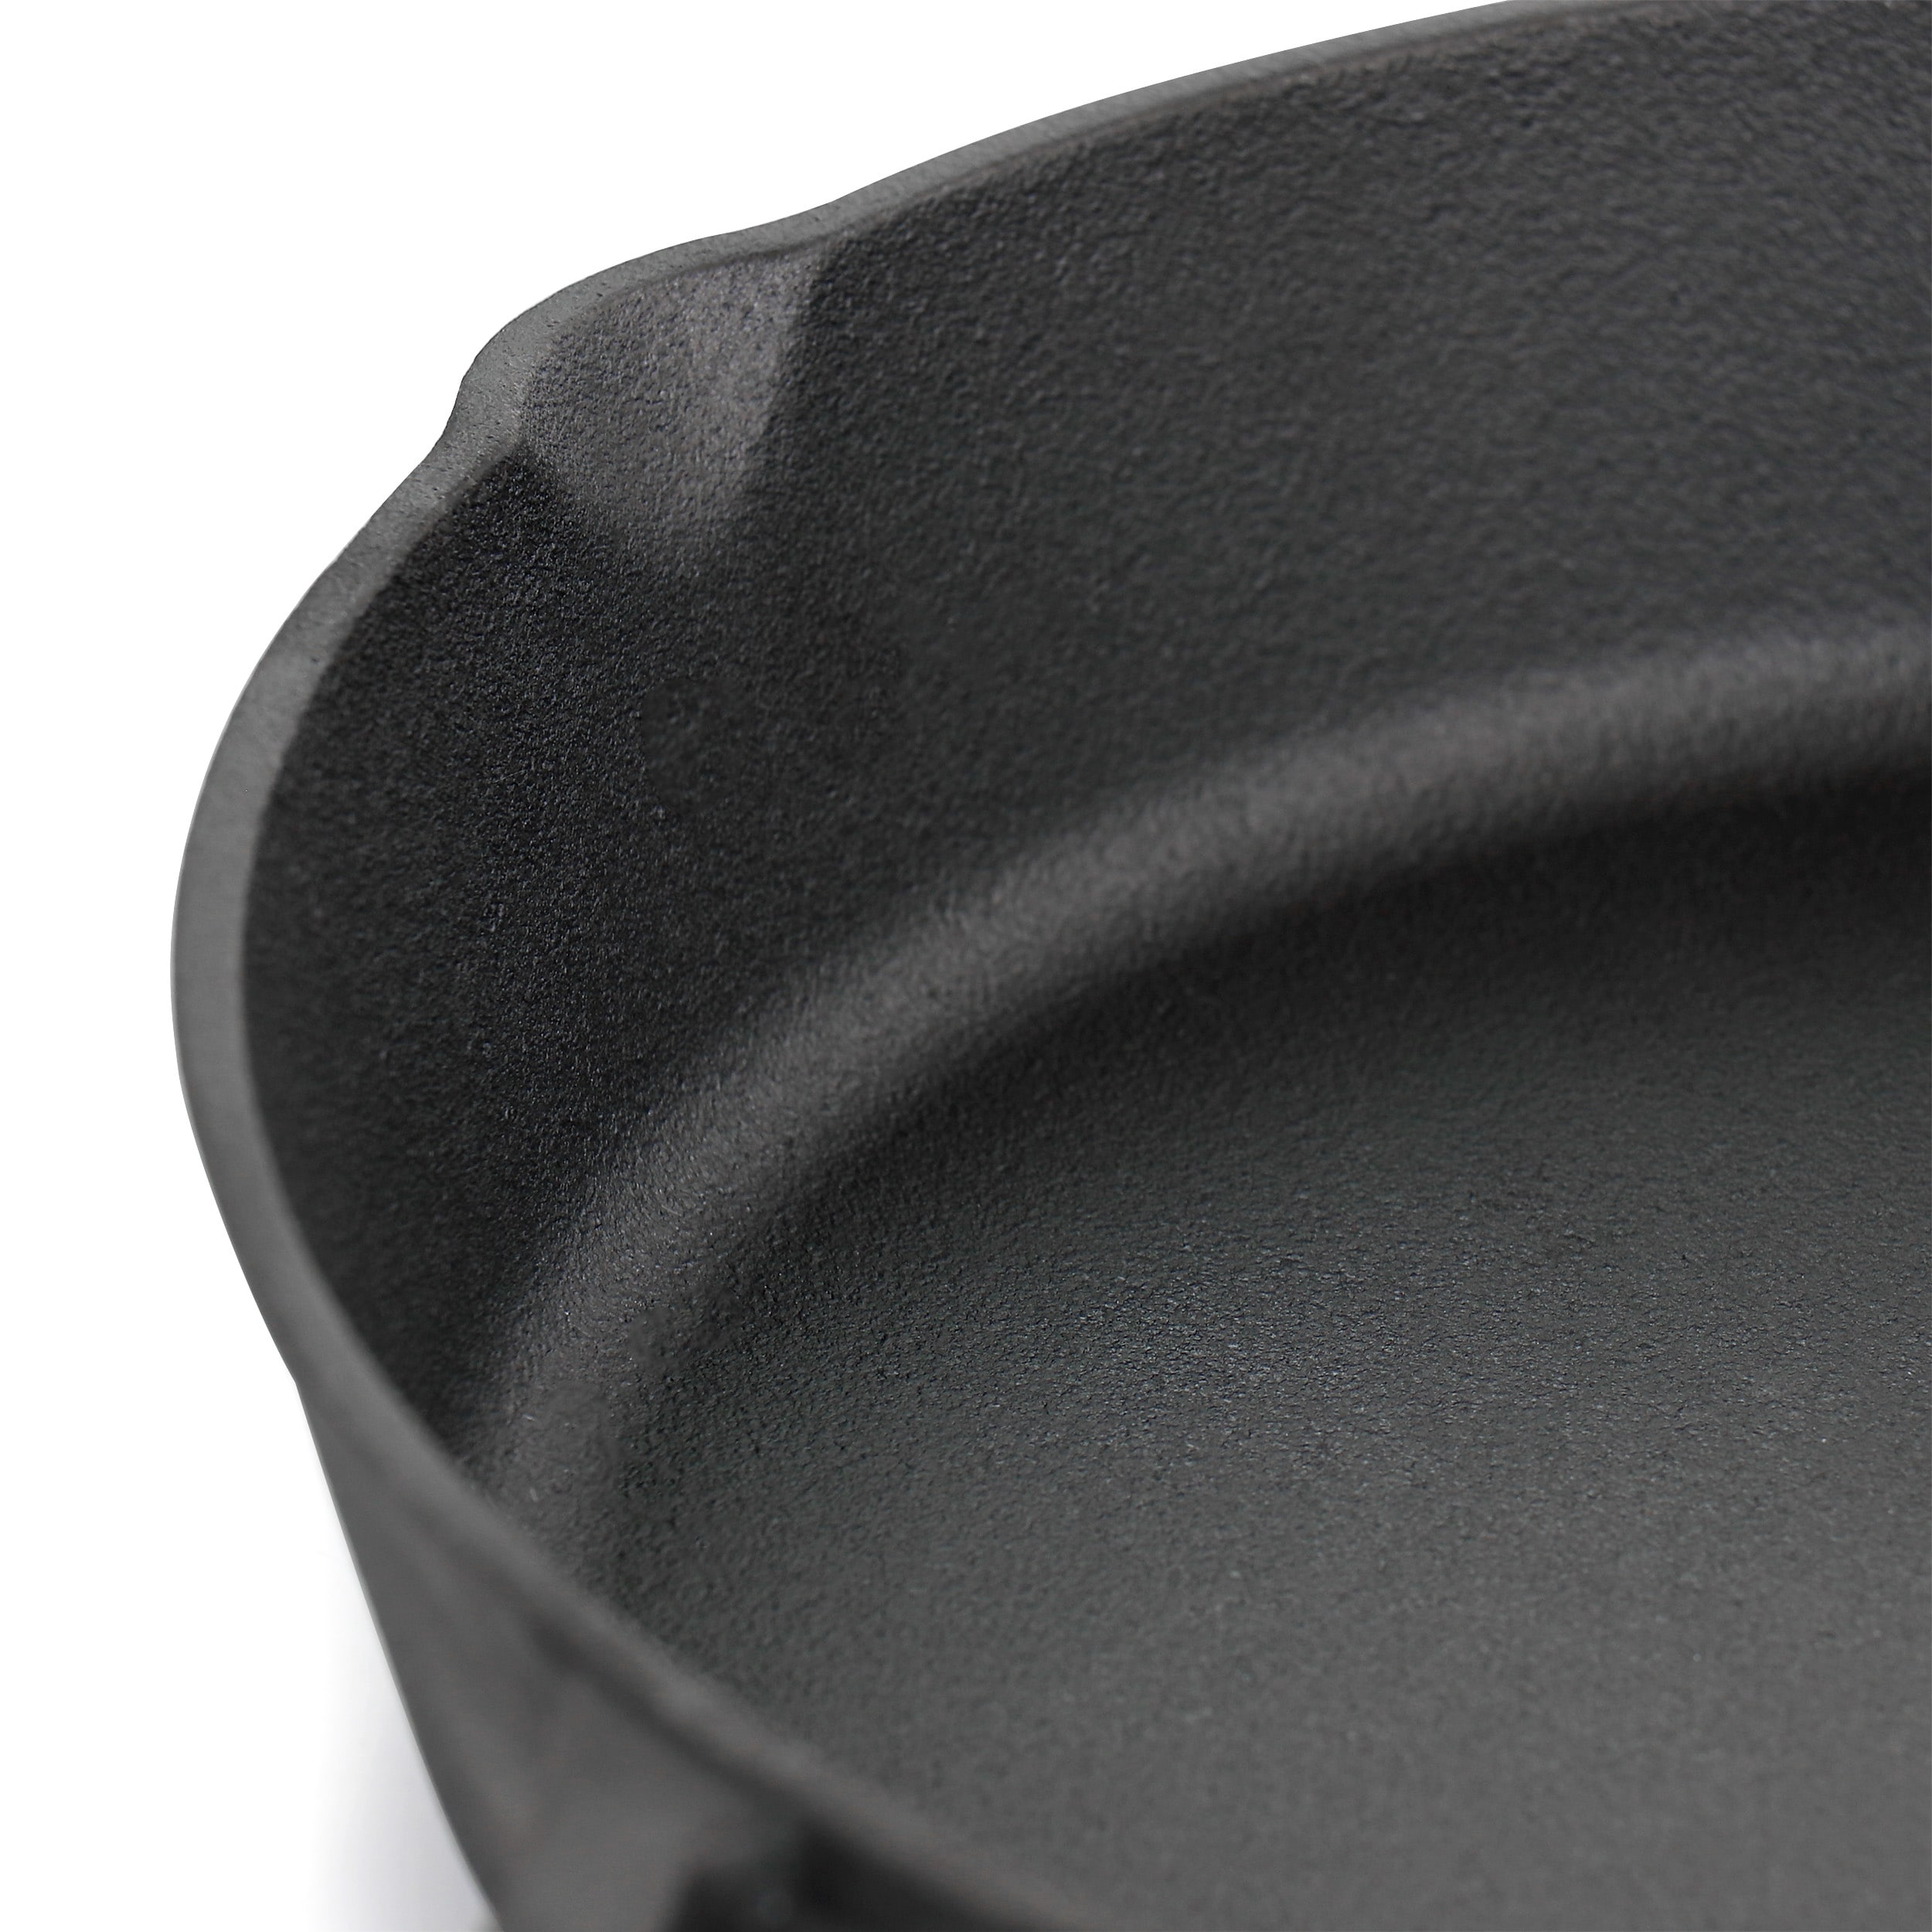 https://ak1.ostkcdn.com/images/products/is/images/direct/1ba9d87ee9e828fa99f49242e88d0e82ff17f7cc/Oster-Castaway-12-Inch-Cast-Iron-Round-Frying-Pan-with-Dual-Spouts.jpg